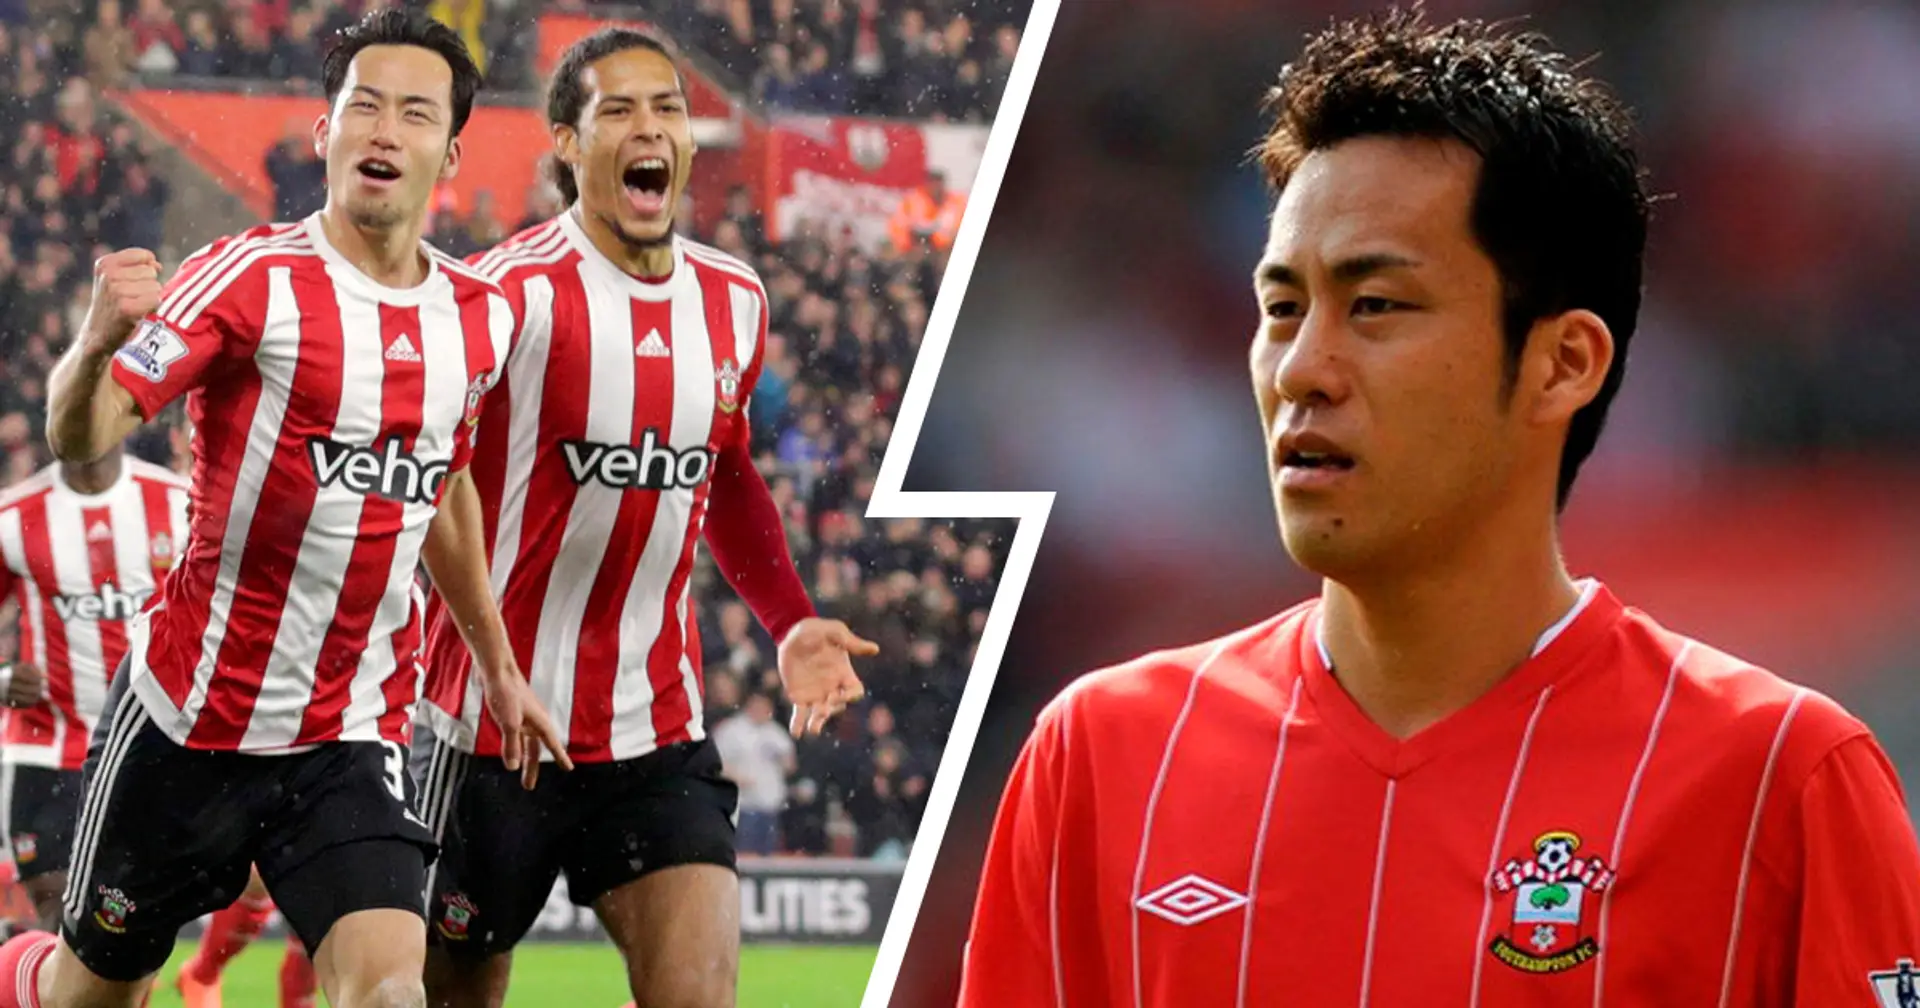 'He's the first one to go home after training': Van Dijk's former teammate Yoshida shares memory which perfectly illustrates Big Virg's natural ability